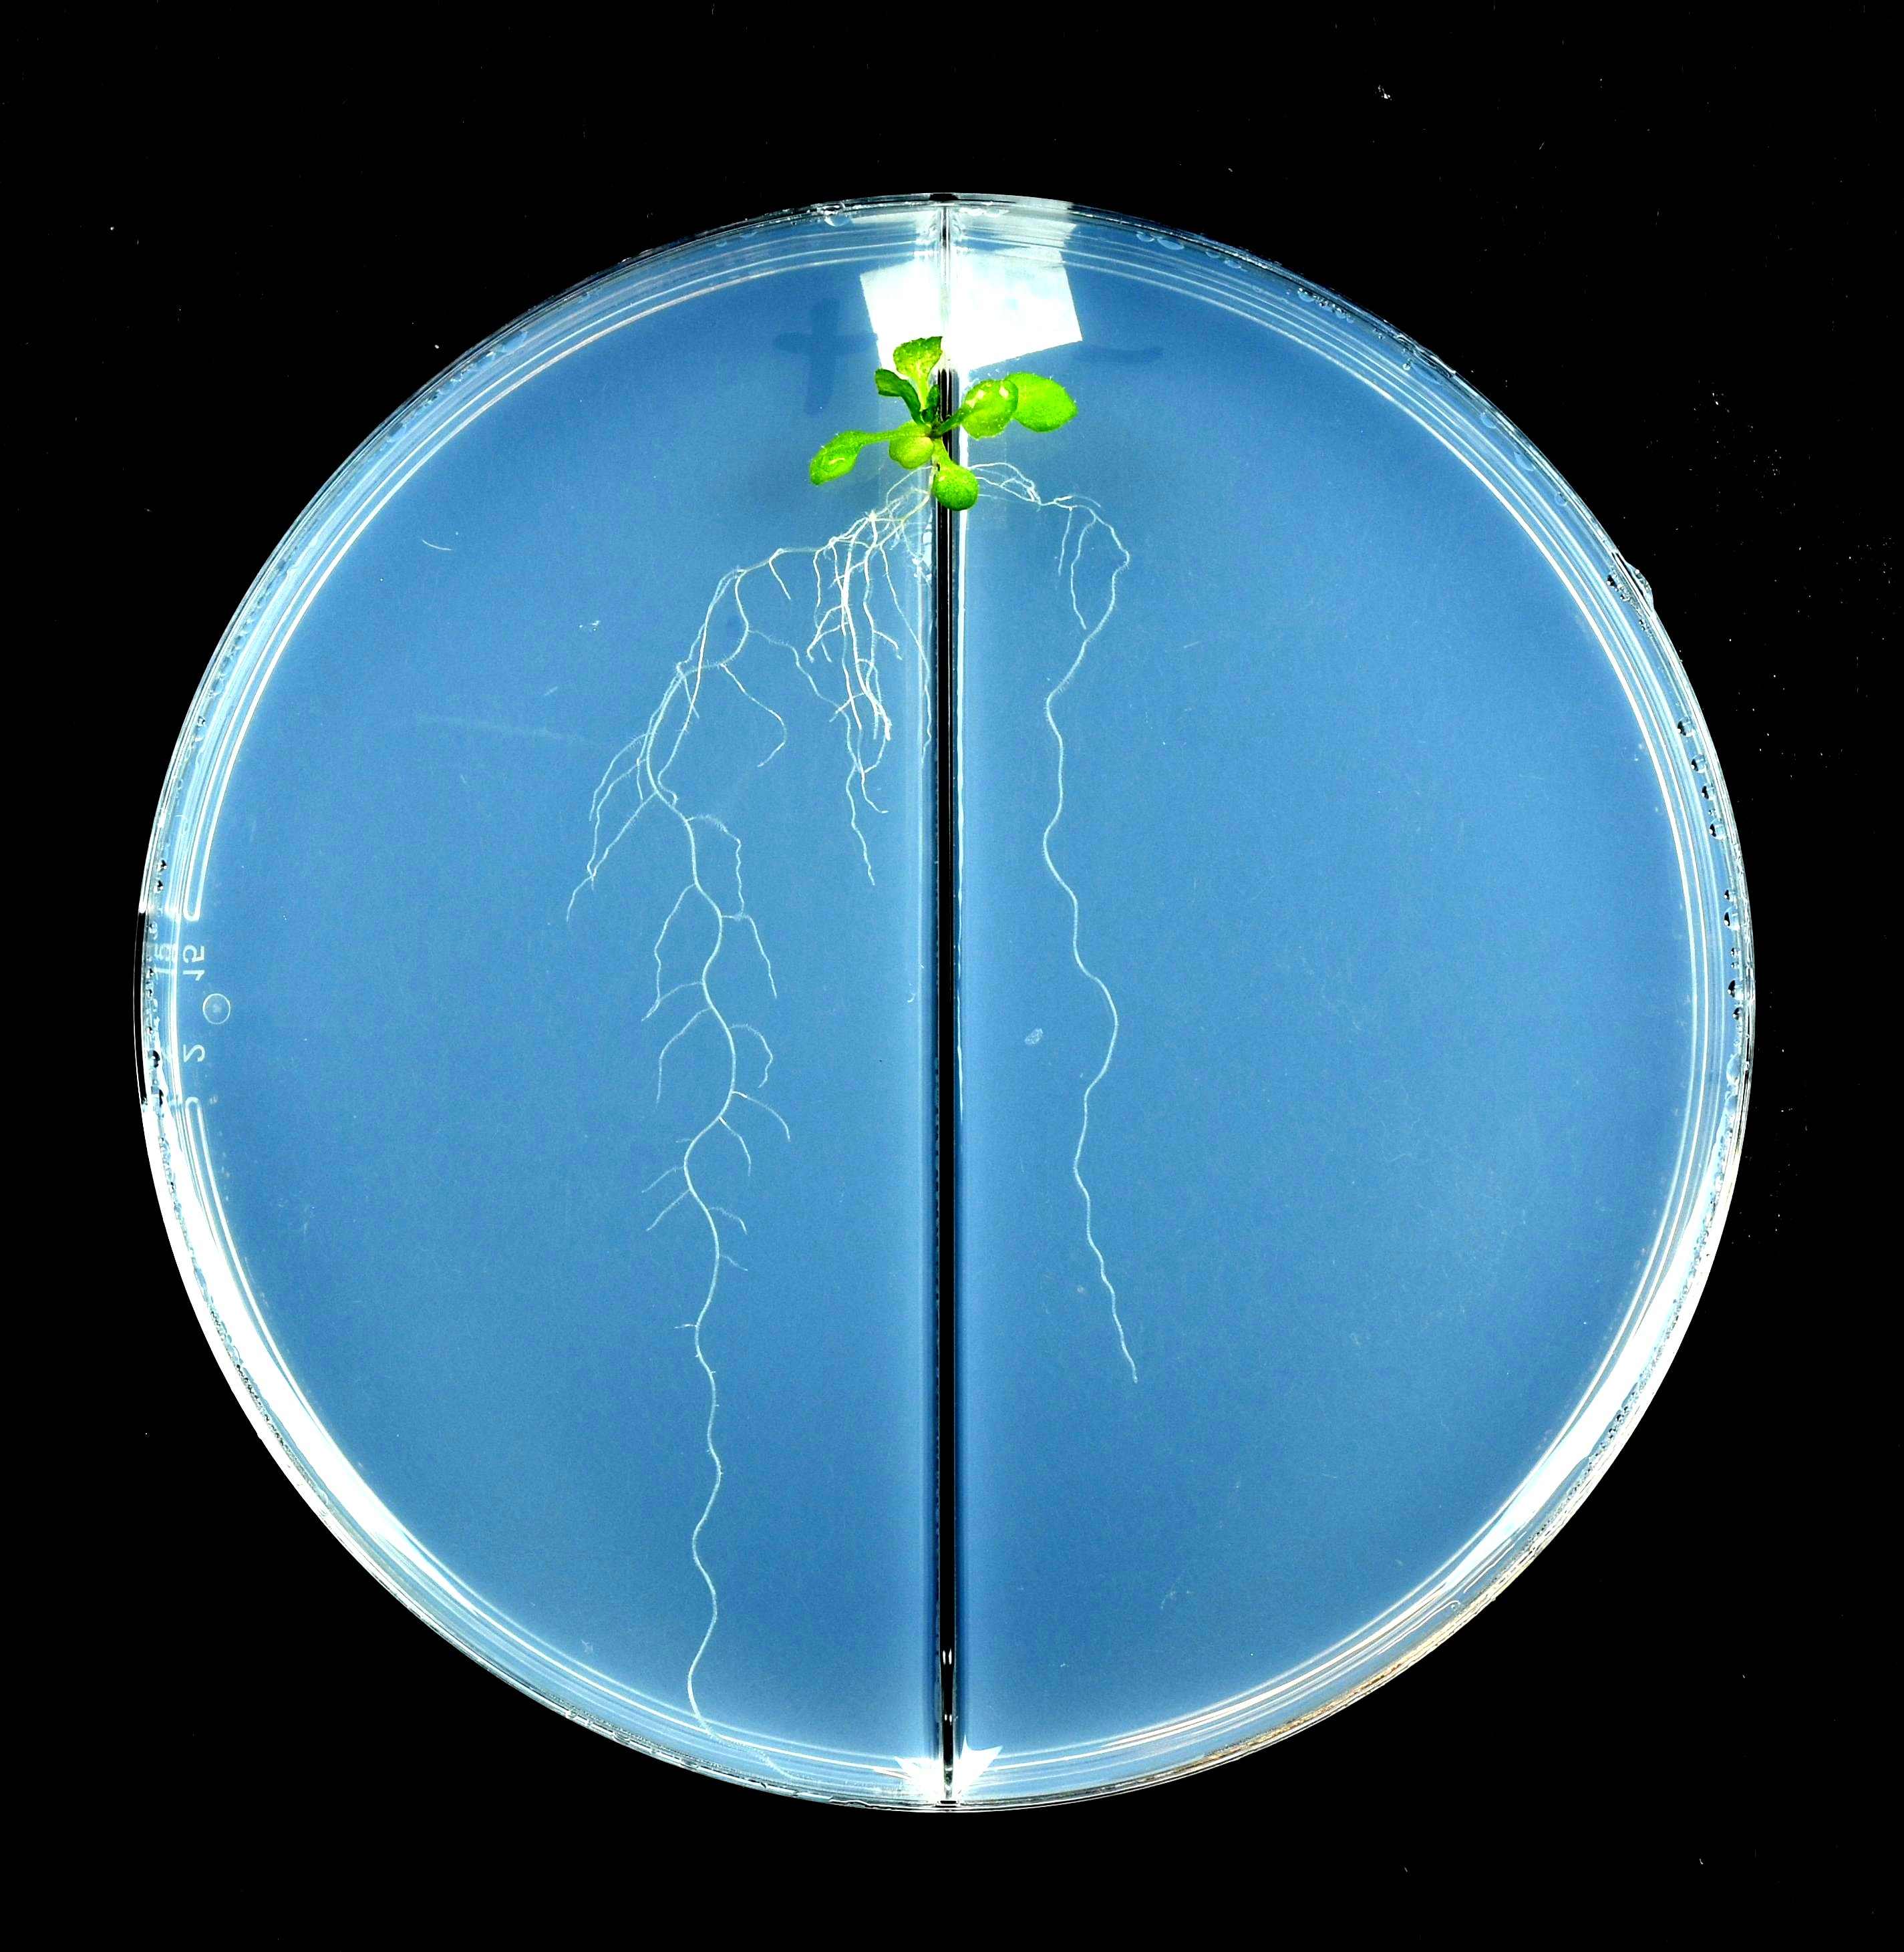 Tokizawa’s study shows an Arabidopsis plant root growing in nitrate-sufficient (left) and nitrate-deficient (right) media, with the latter having fewer lateral roots which are critical to help the plant acquire more nitrate in nitrate-rich growth media.